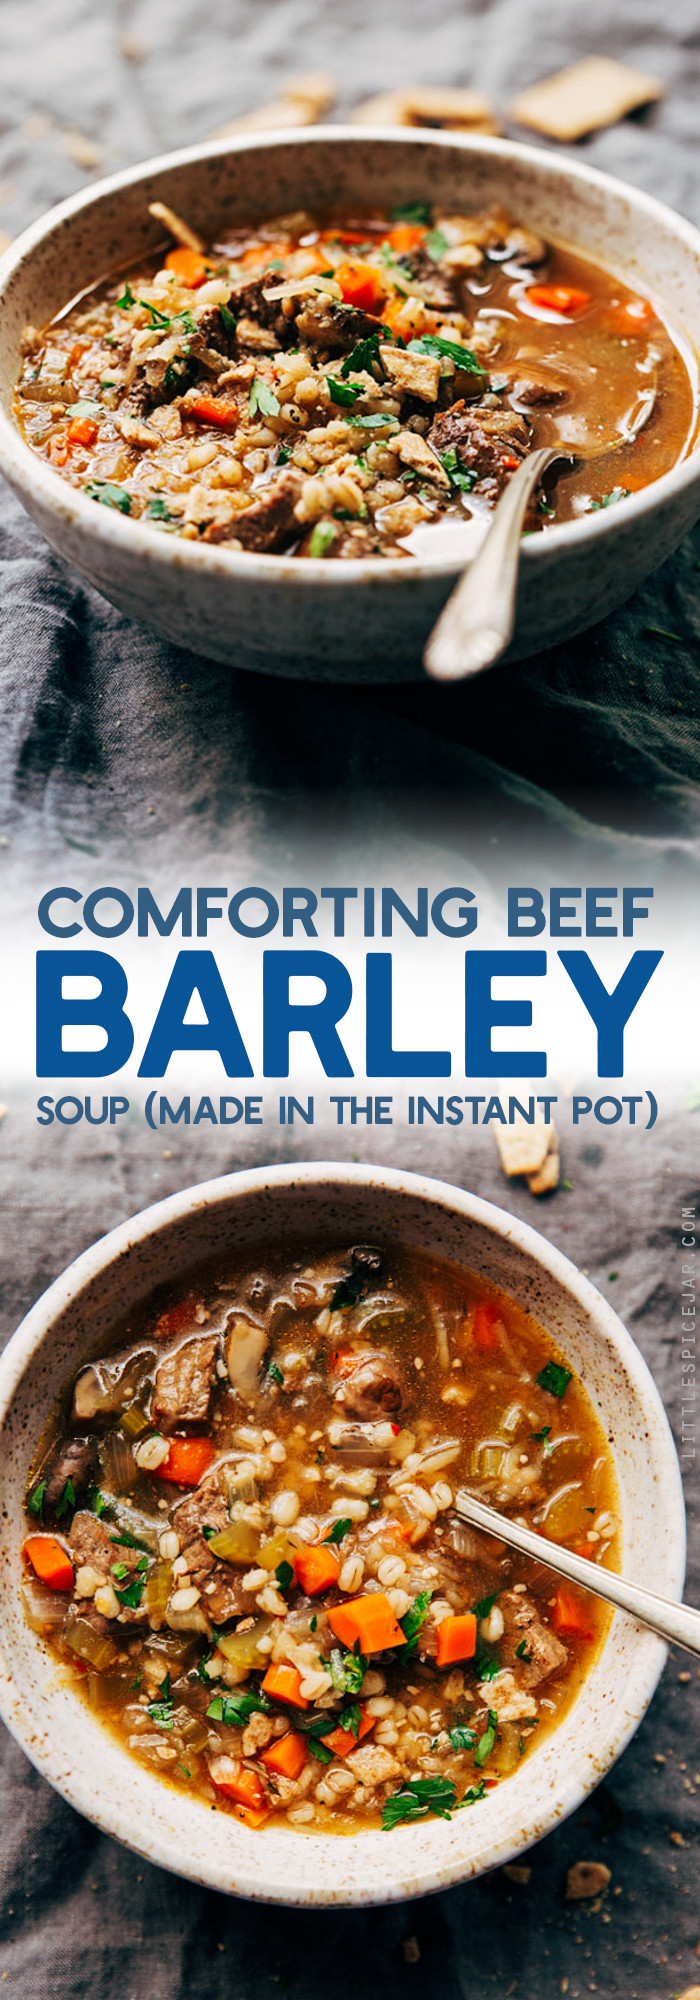 Instant Pot Barley
 forting Beef Barley Soup Instant Pot Recipe